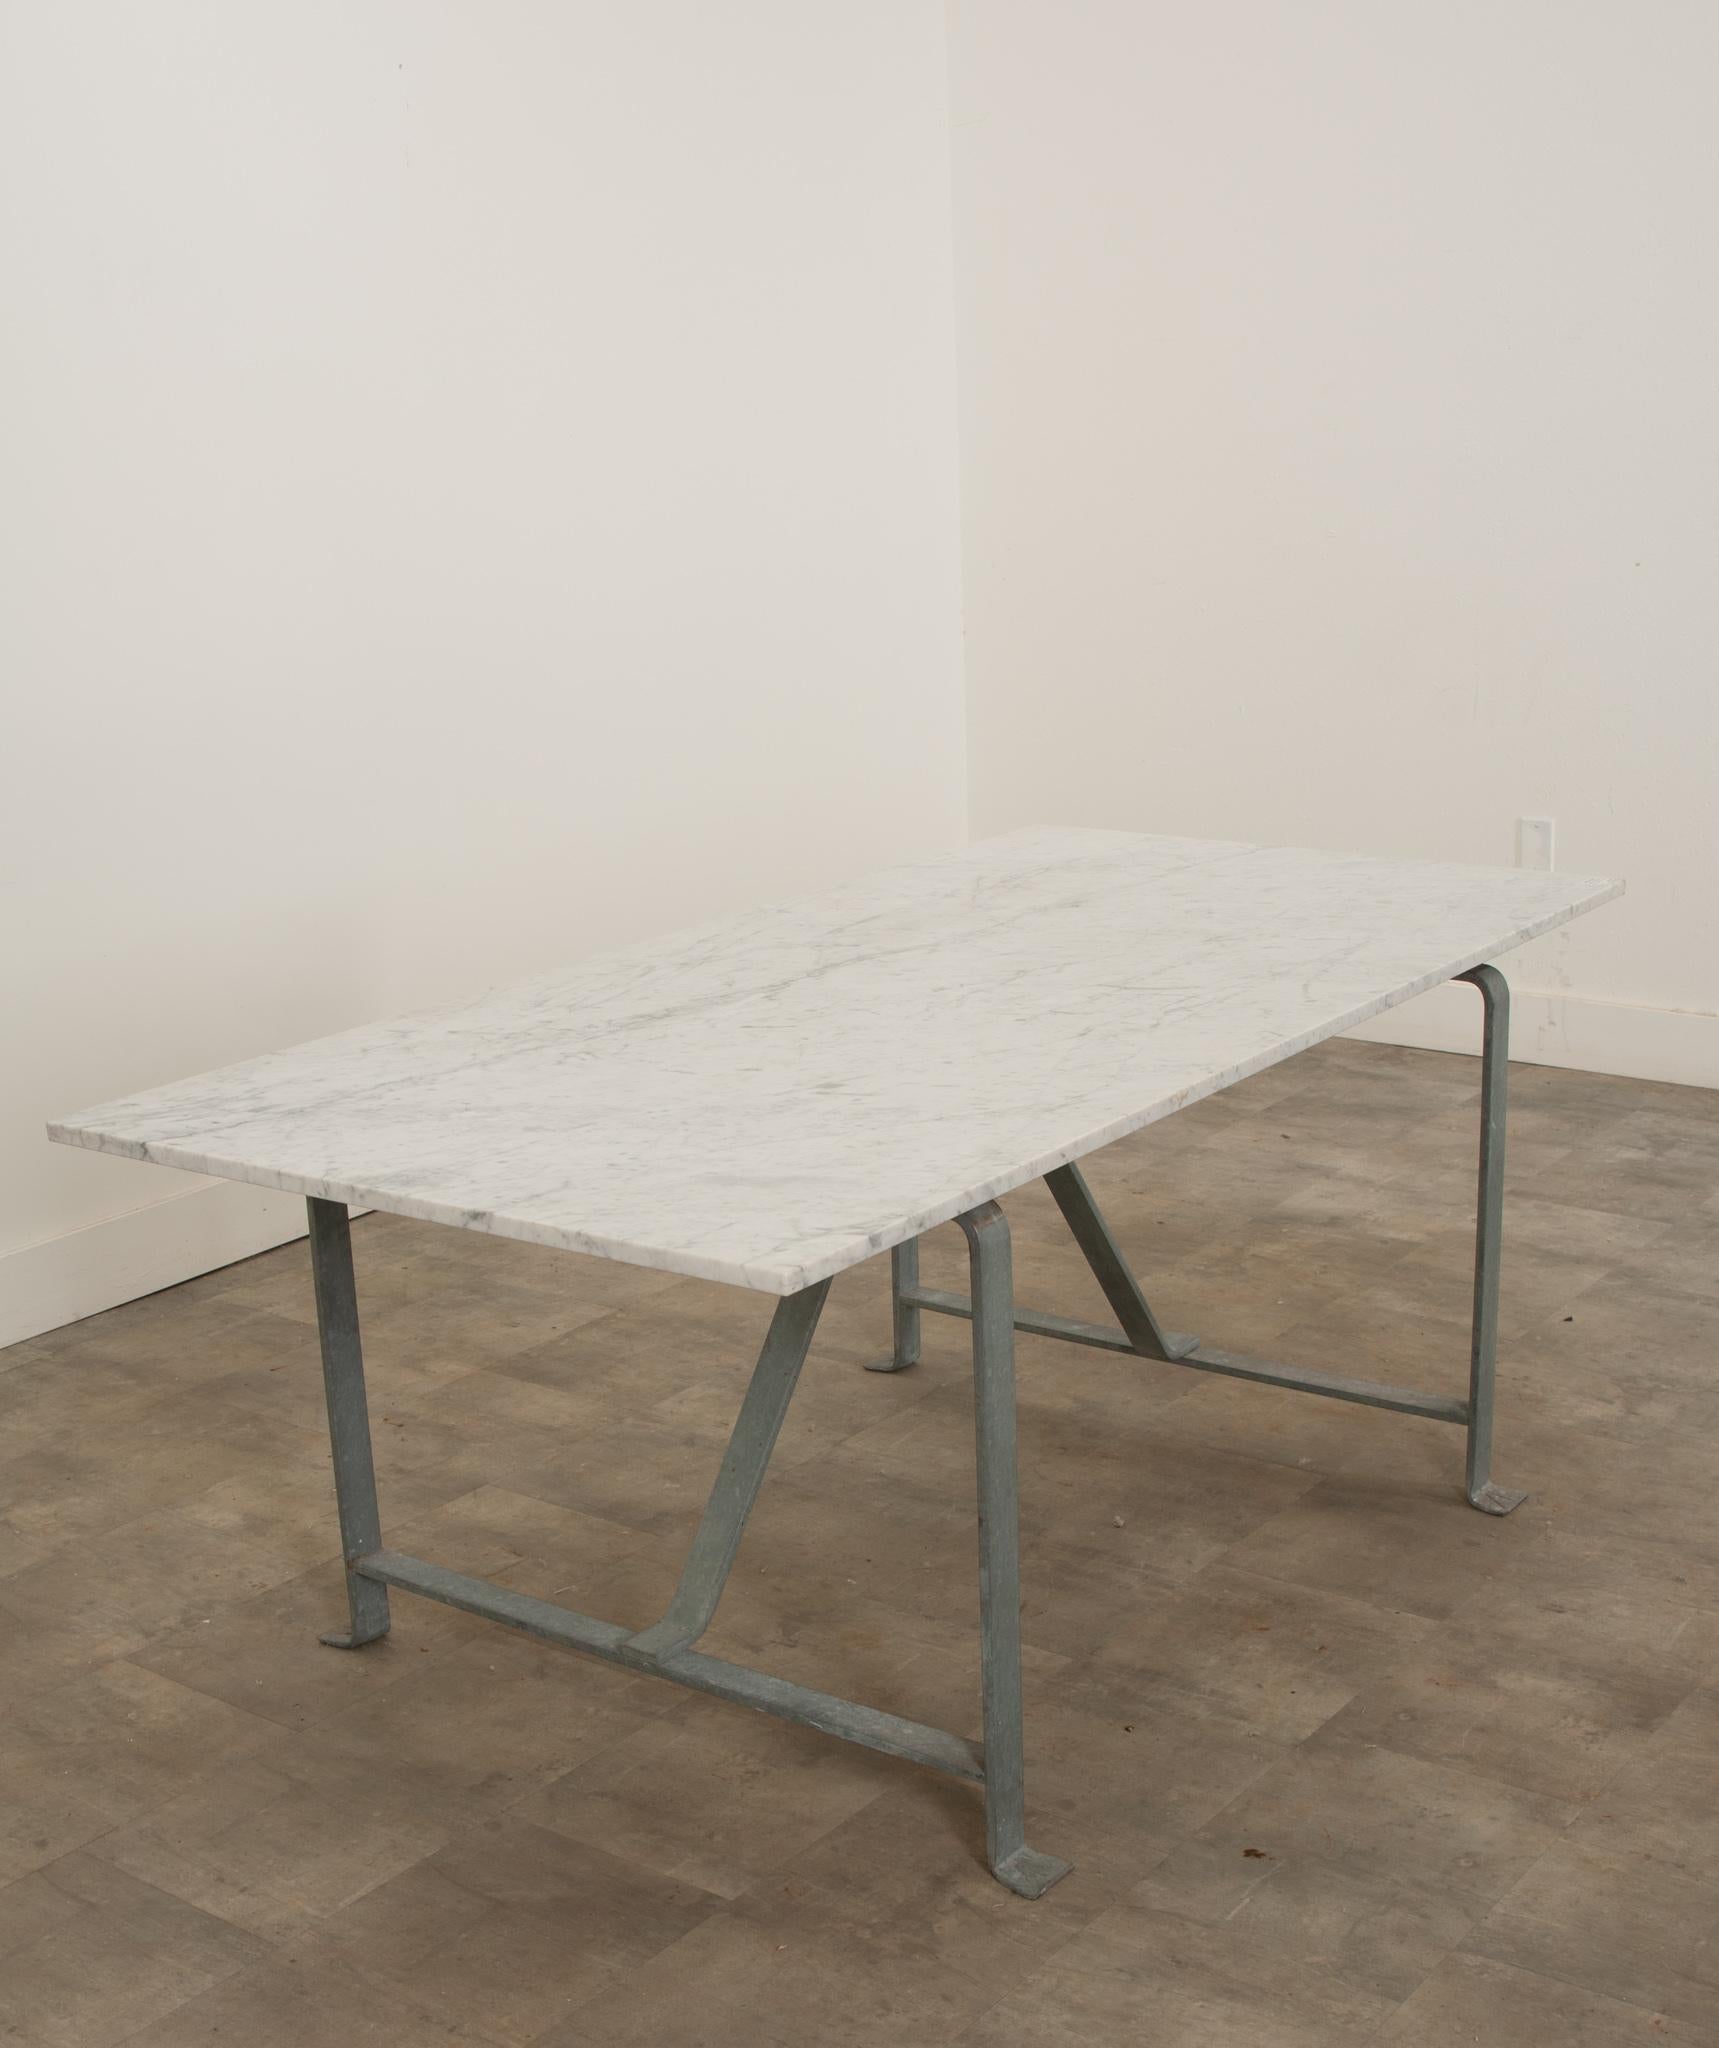 Vintage Iron & White Marble Dining Table In Good Condition For Sale In Baton Rouge, LA